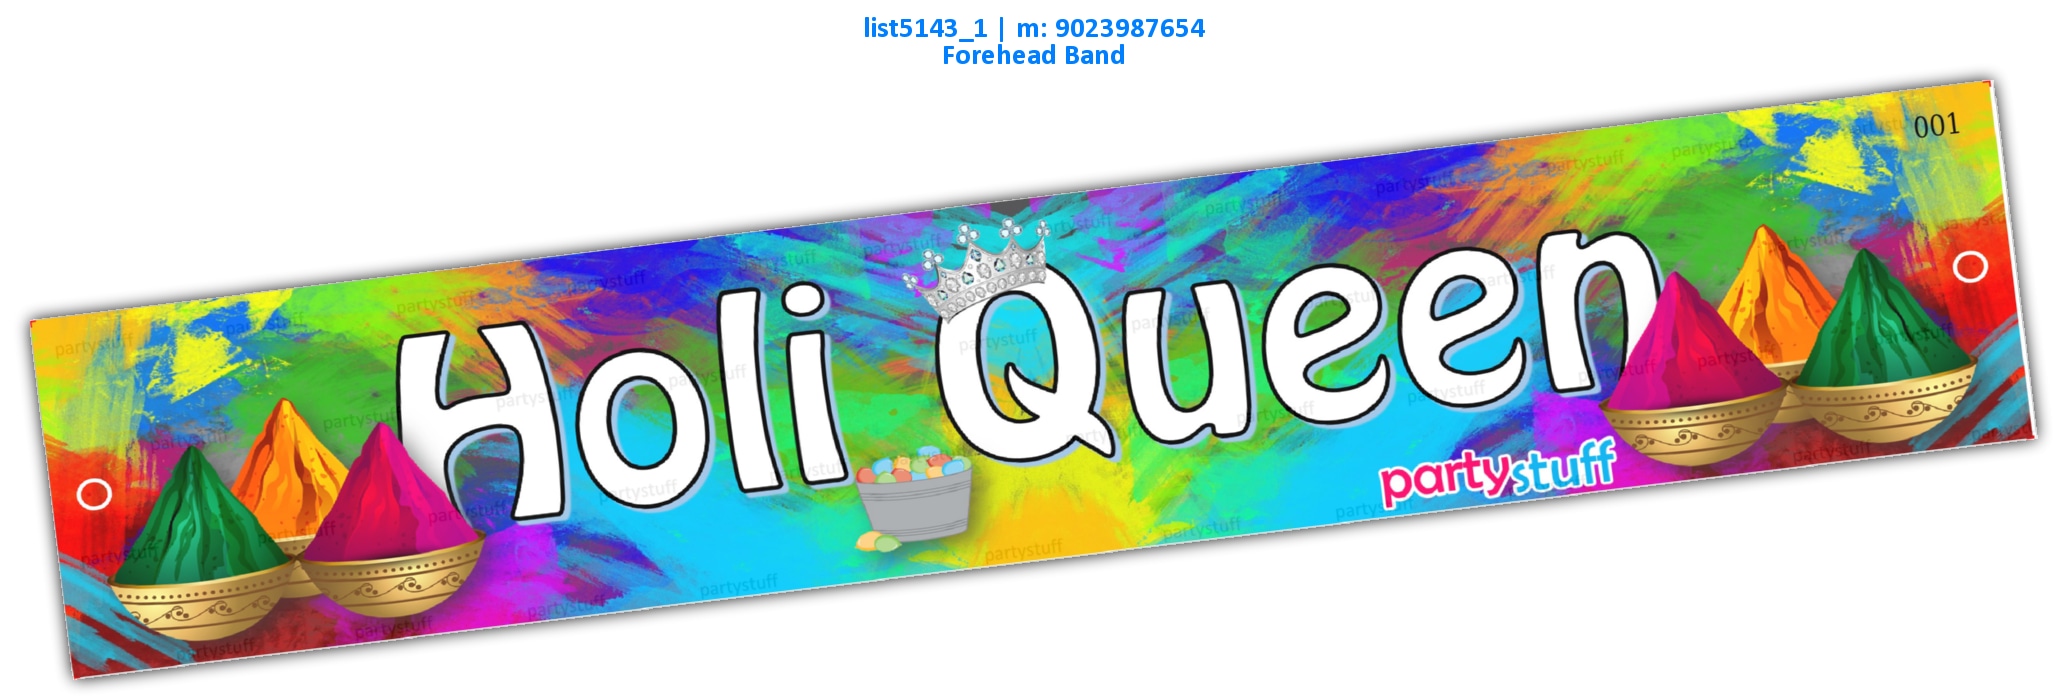 Holi Queen Forehead band 2 list5143_1 Printed Accessory